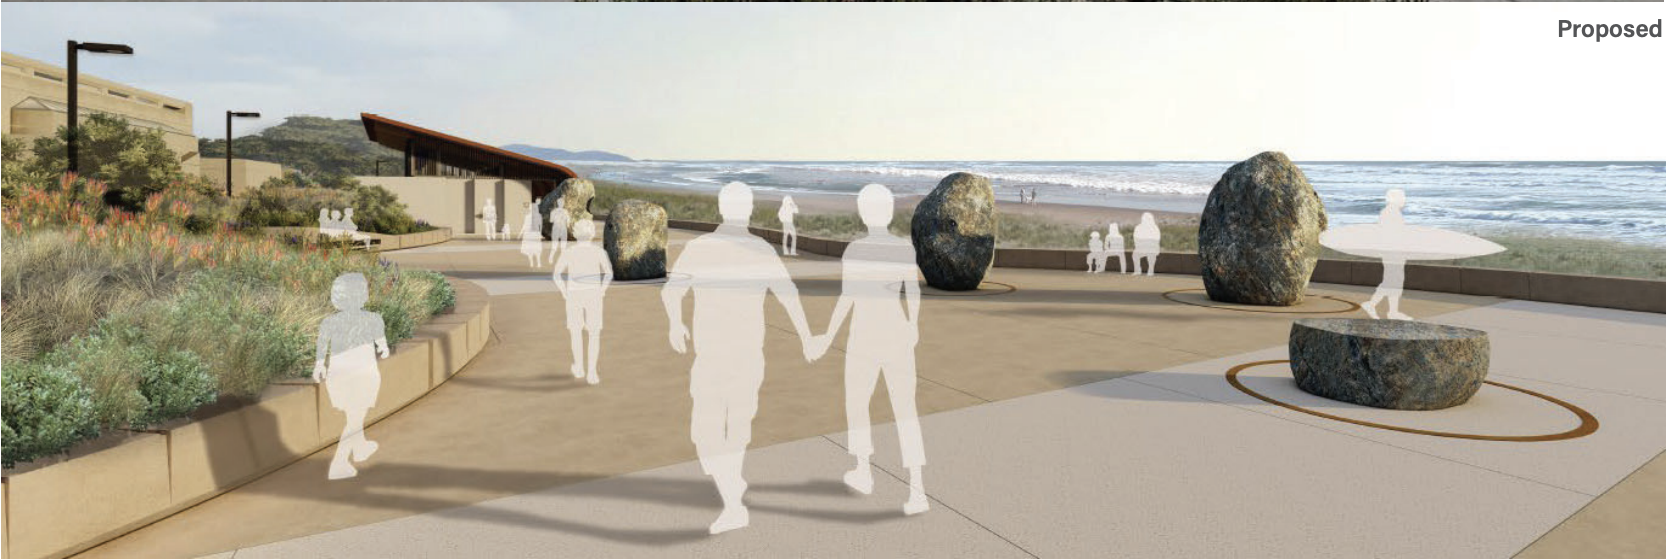 This image shows a proposed beachfront promenade with large rocks, plants, and various silhouettes of people walking, holding hands, and carrying surfboards.